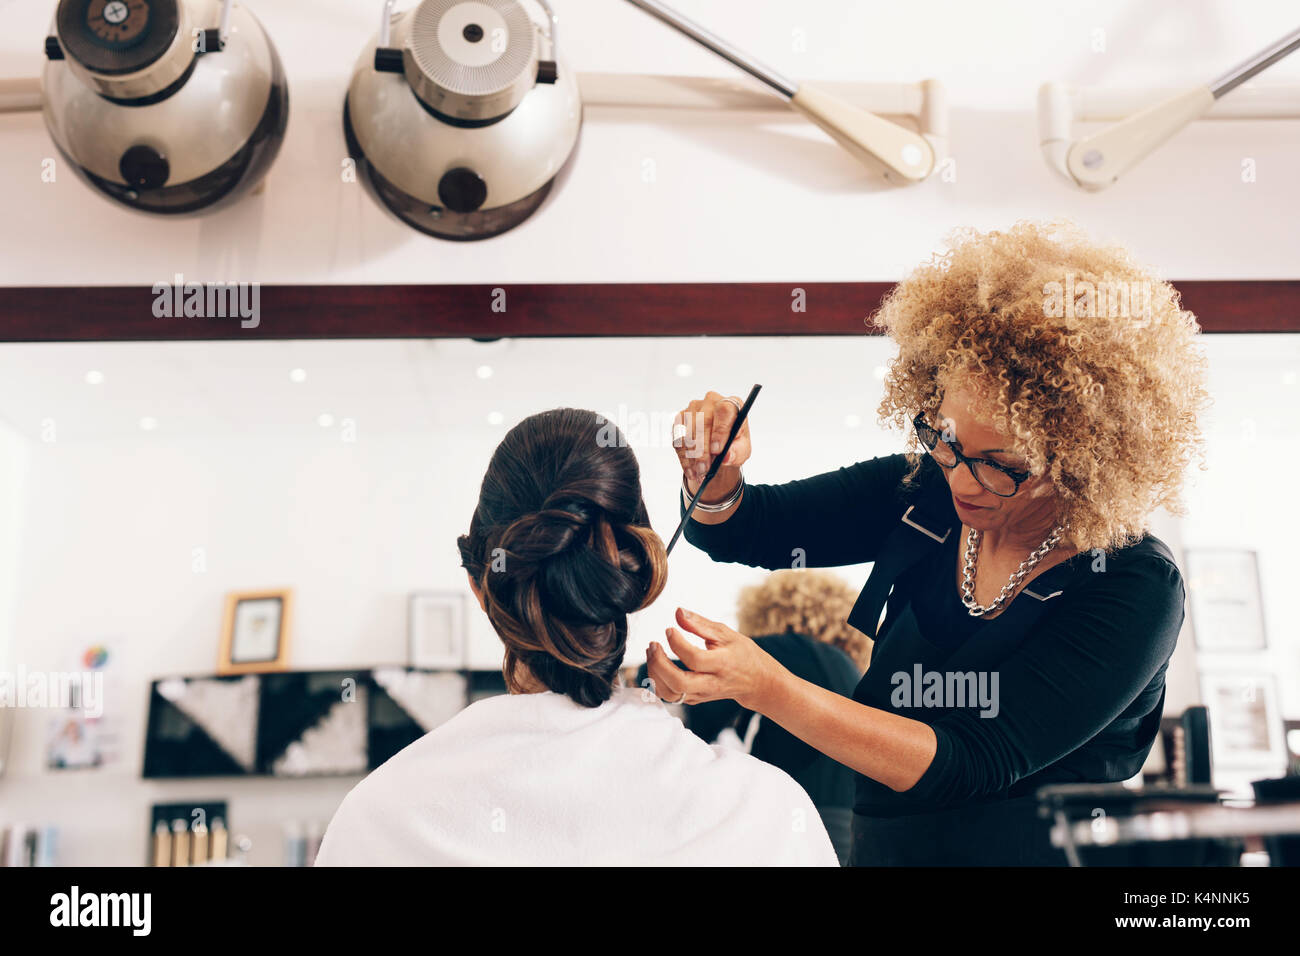 Professional hairdresser styling the hair of a customer at salon. Female hair stylist setting hair in fashionable design. Stock Photo